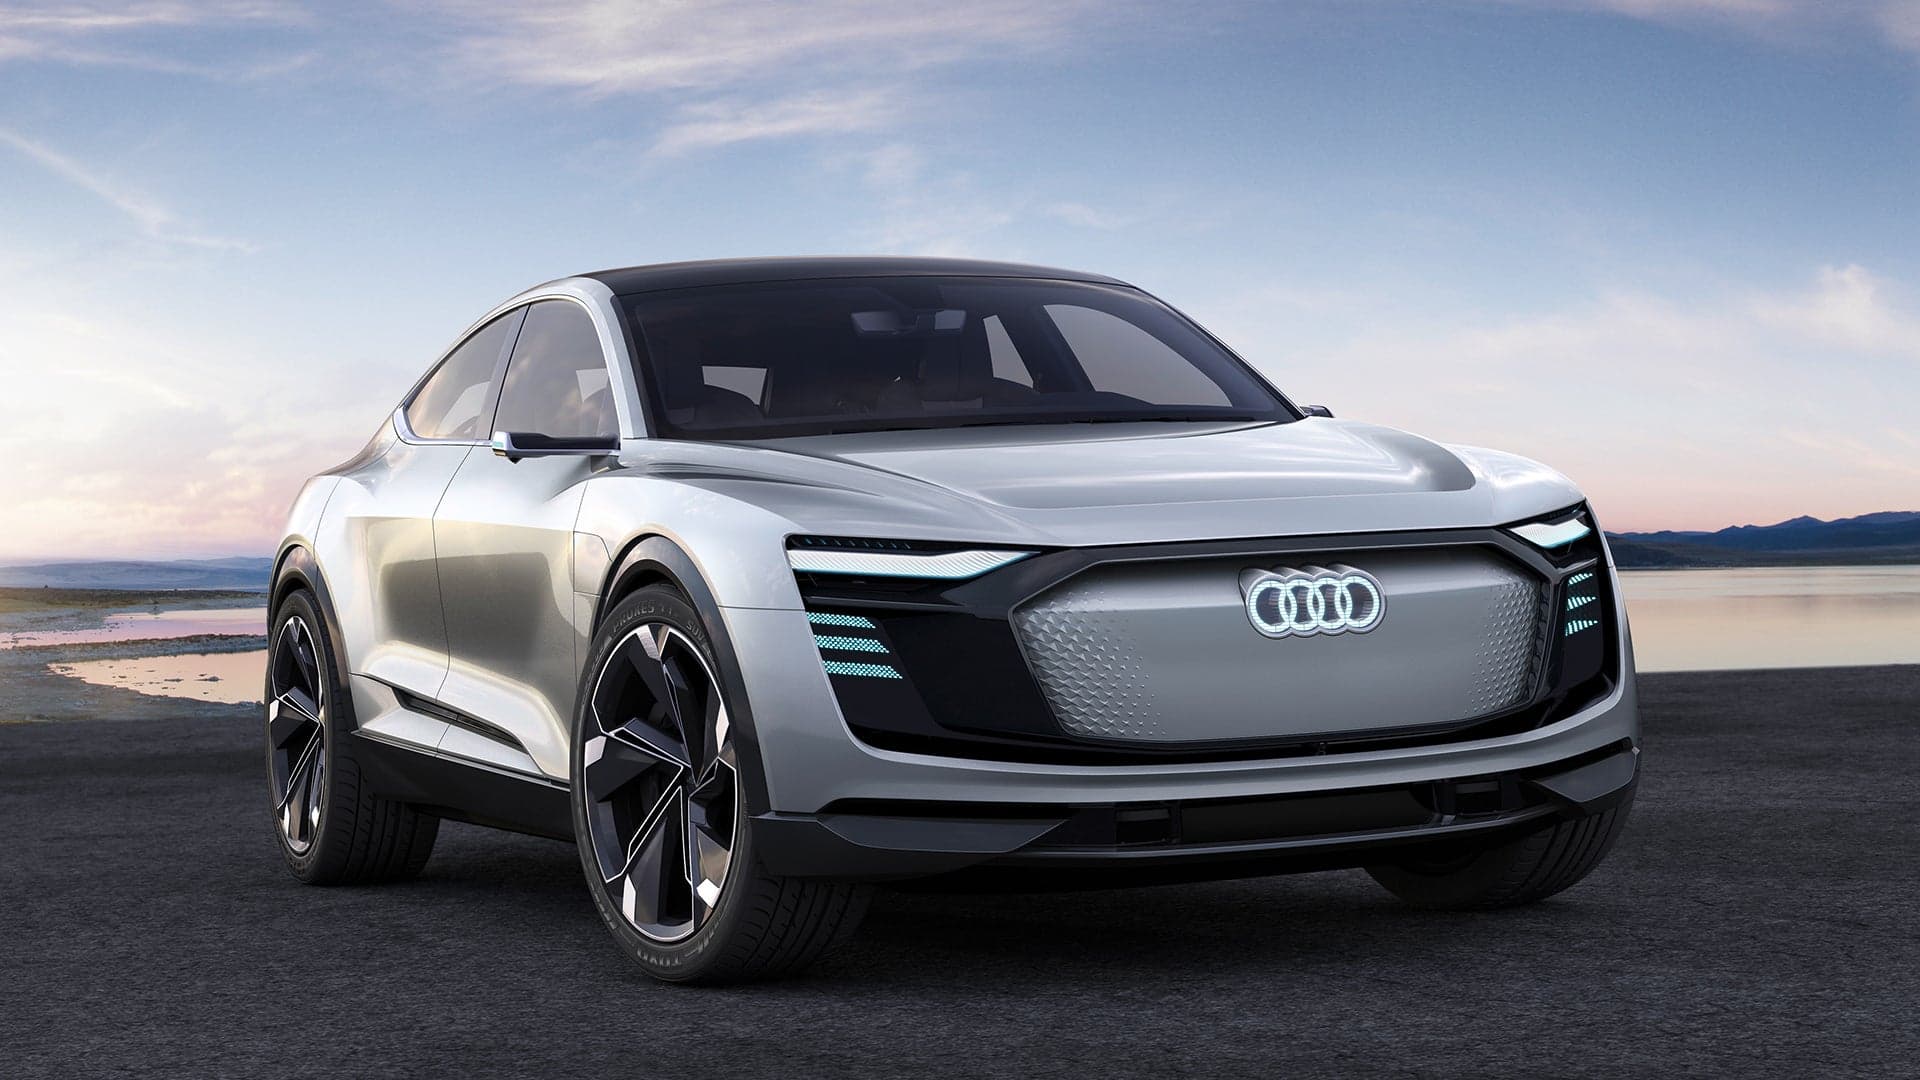 Audi to Launch 3 New Electric Models by 2020, Self-Driving City Car by 2021